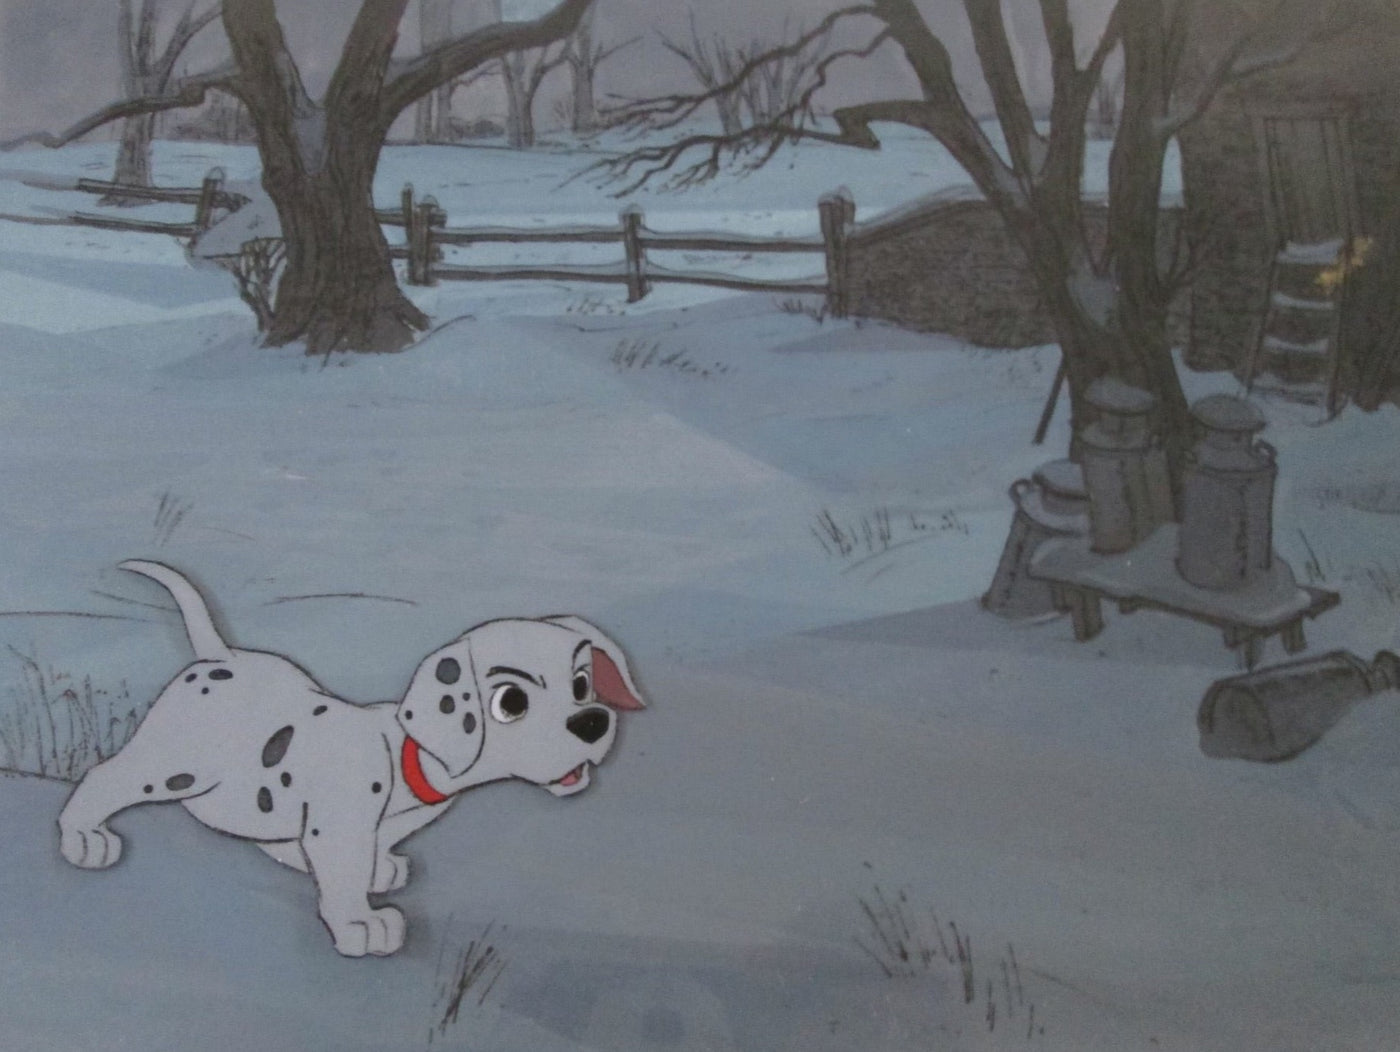 Original Walt Disney Production Cel on Production Background from One Hundred and One Dalmatians